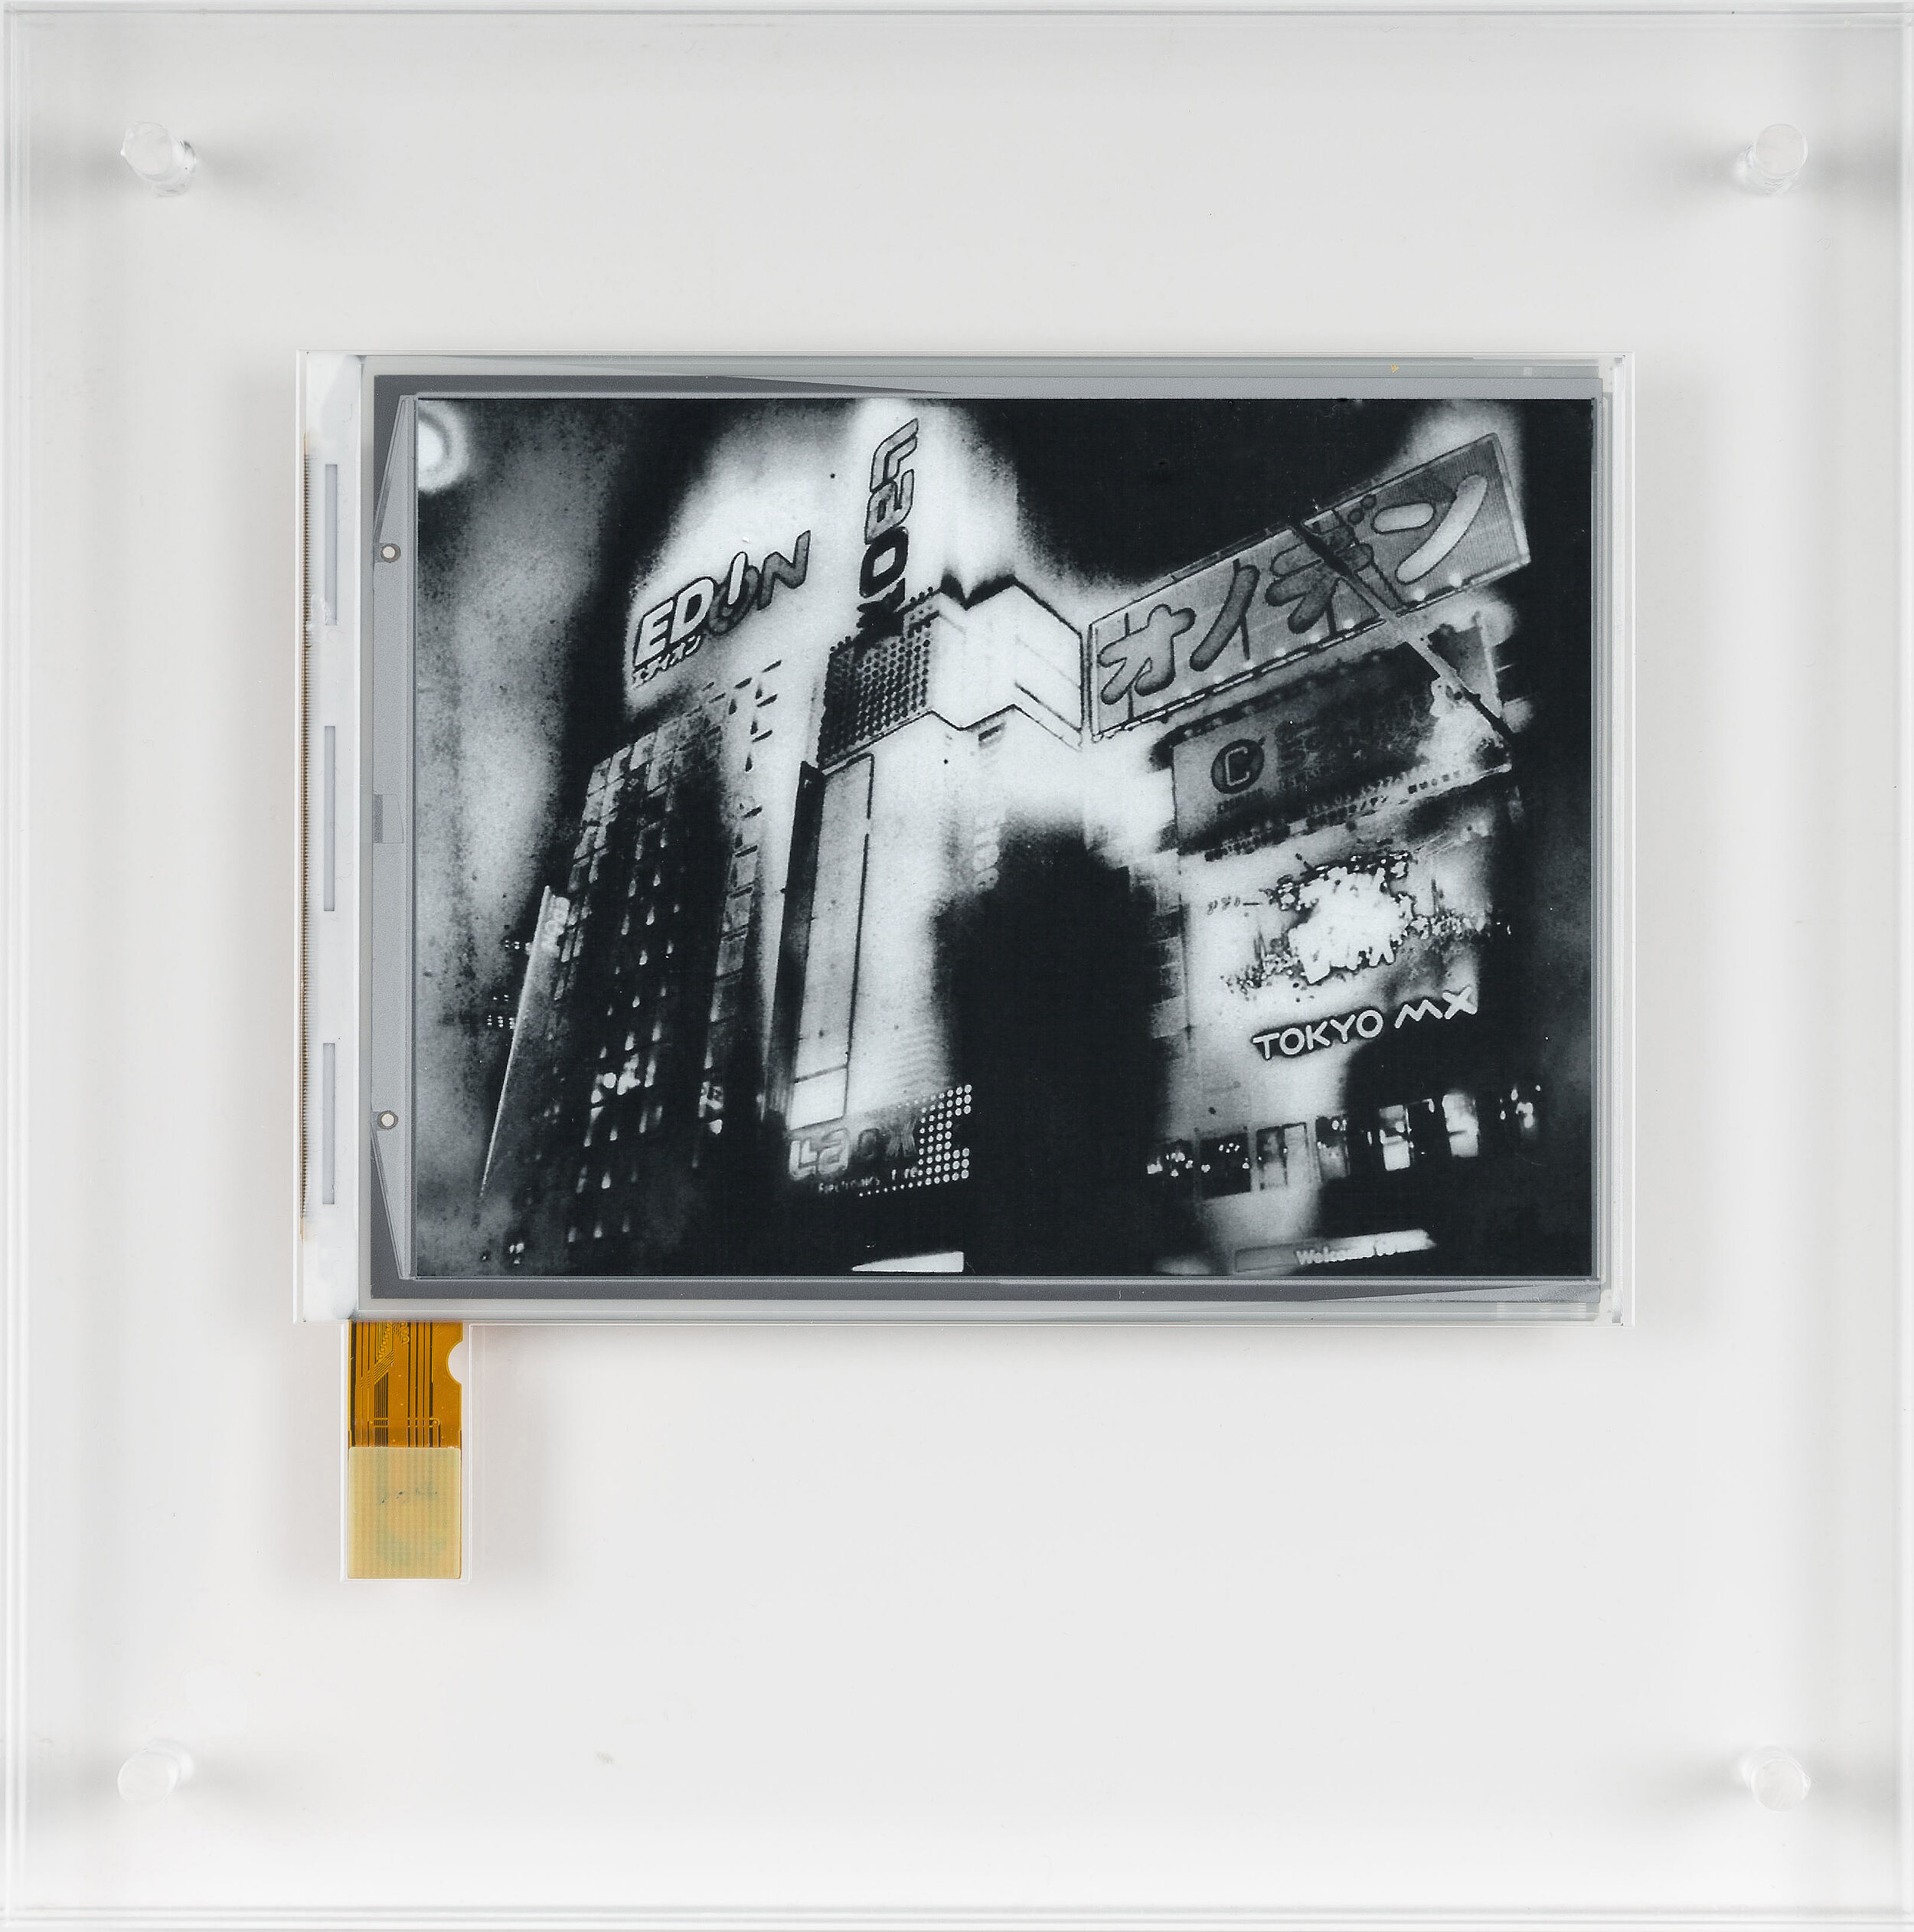 Antony Cairns_E.I. TYO4_048 2021  E-ink screen encapsulated in Perspex box.  Negative Date 2019  10.1cm x 12.9cm - 20 x 20 x 3.2cm with frame  Unique .jpg